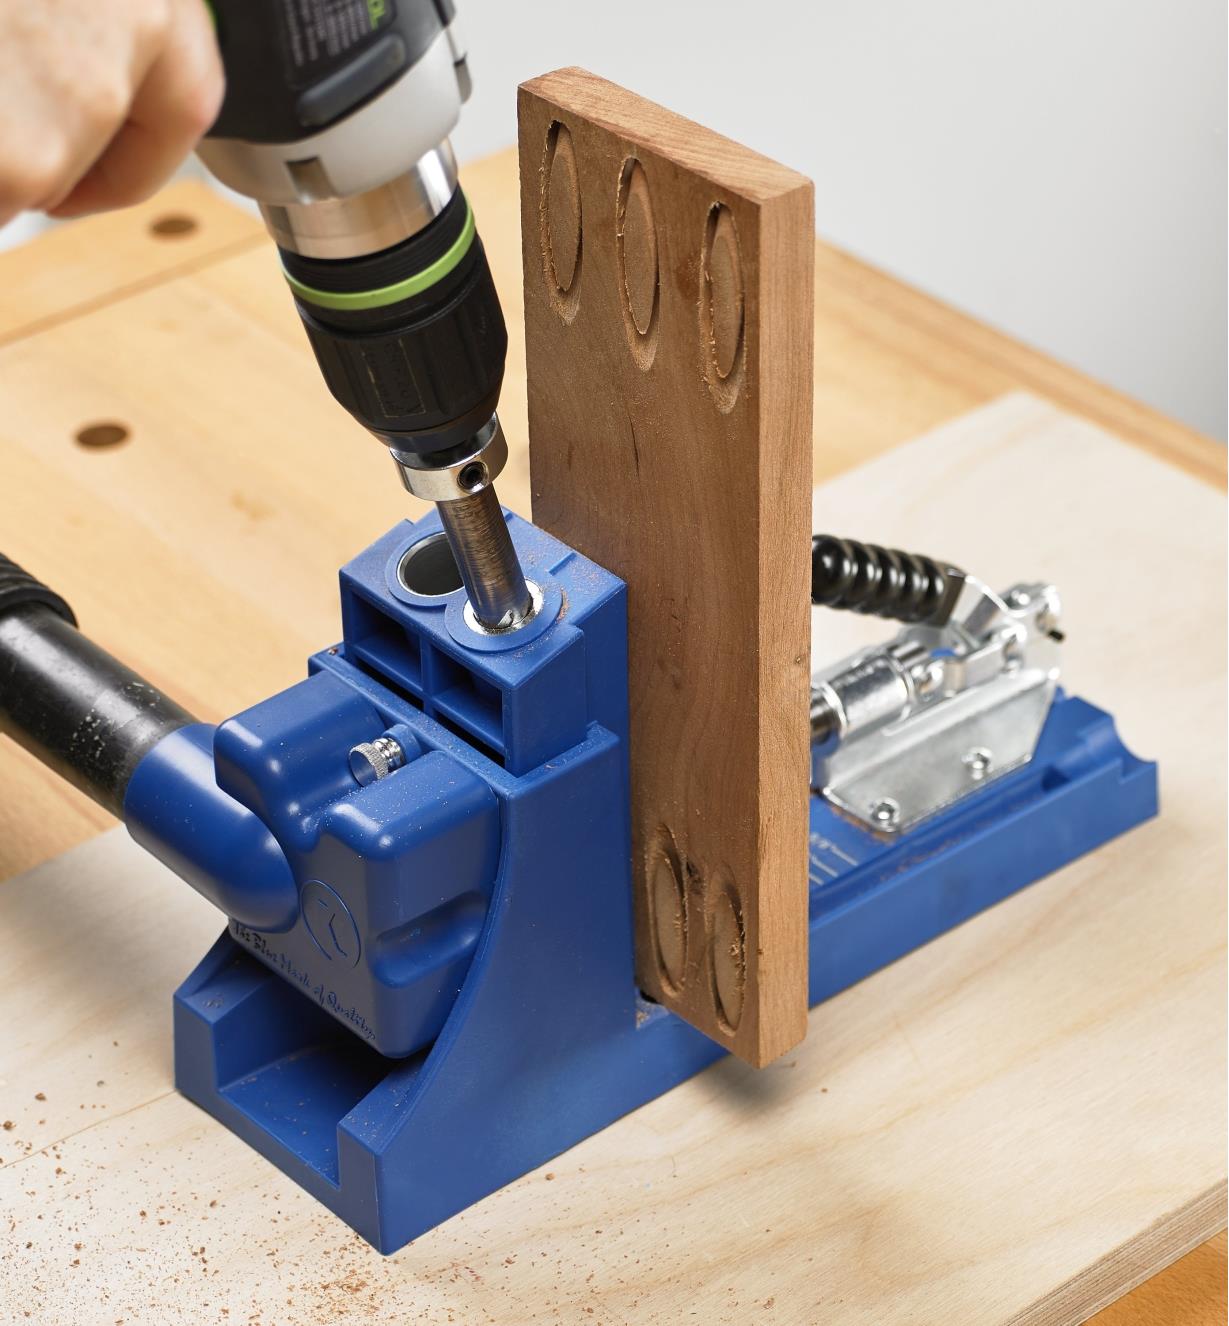 Using a drill to make pocket-hole plugs from a board